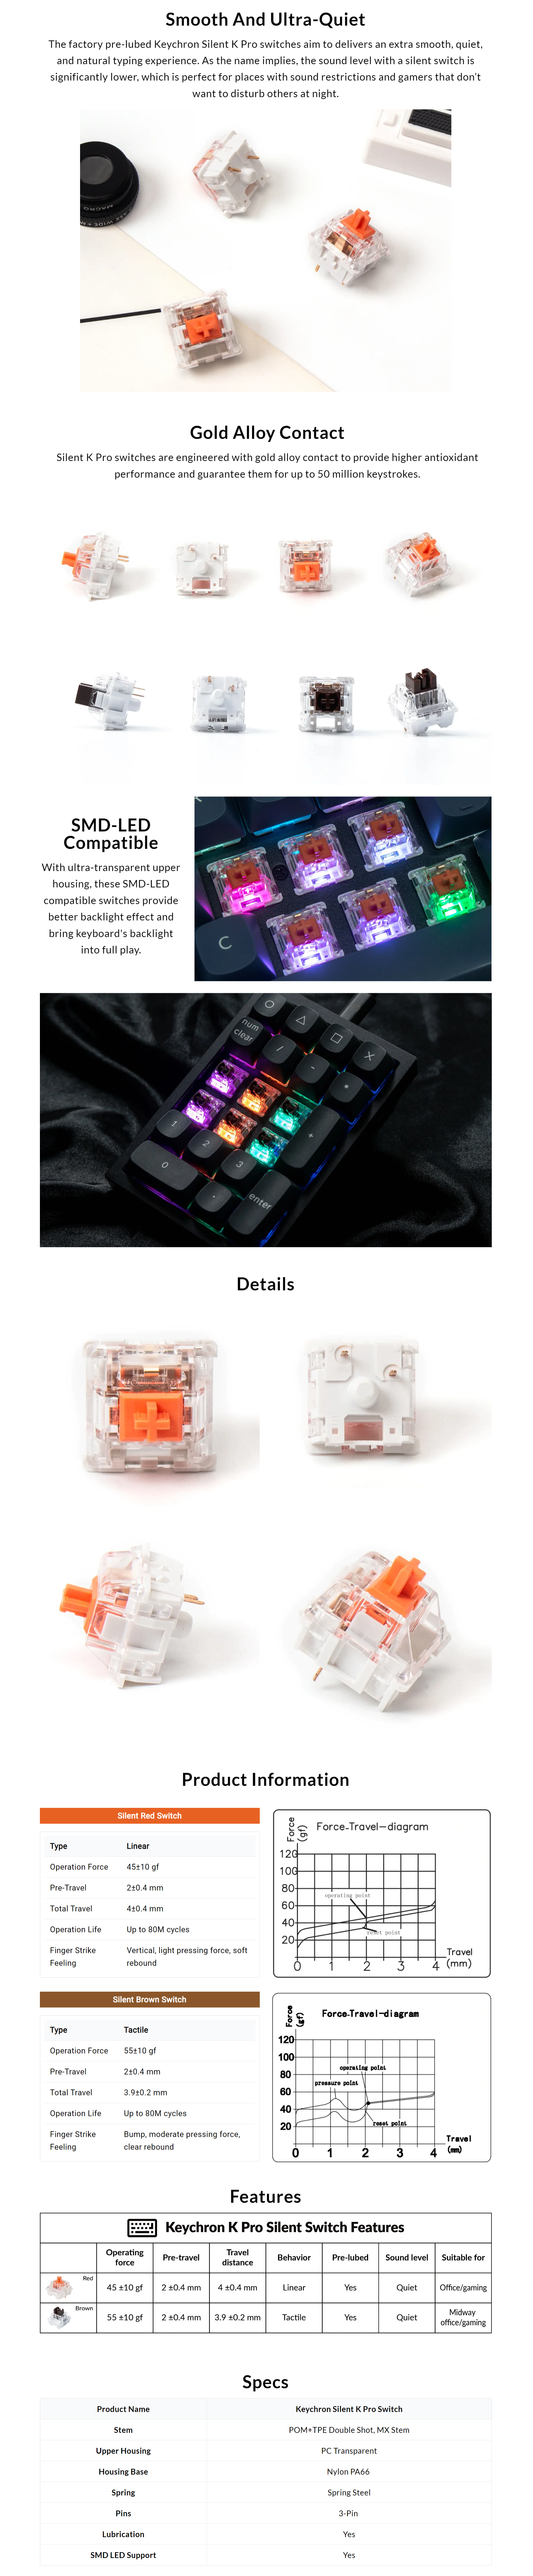 A large marketing image providing additional information about the product Keychron Silent K Pro Brown - 55g Tactile Switch Set (110pcs) - Additional alt info not provided